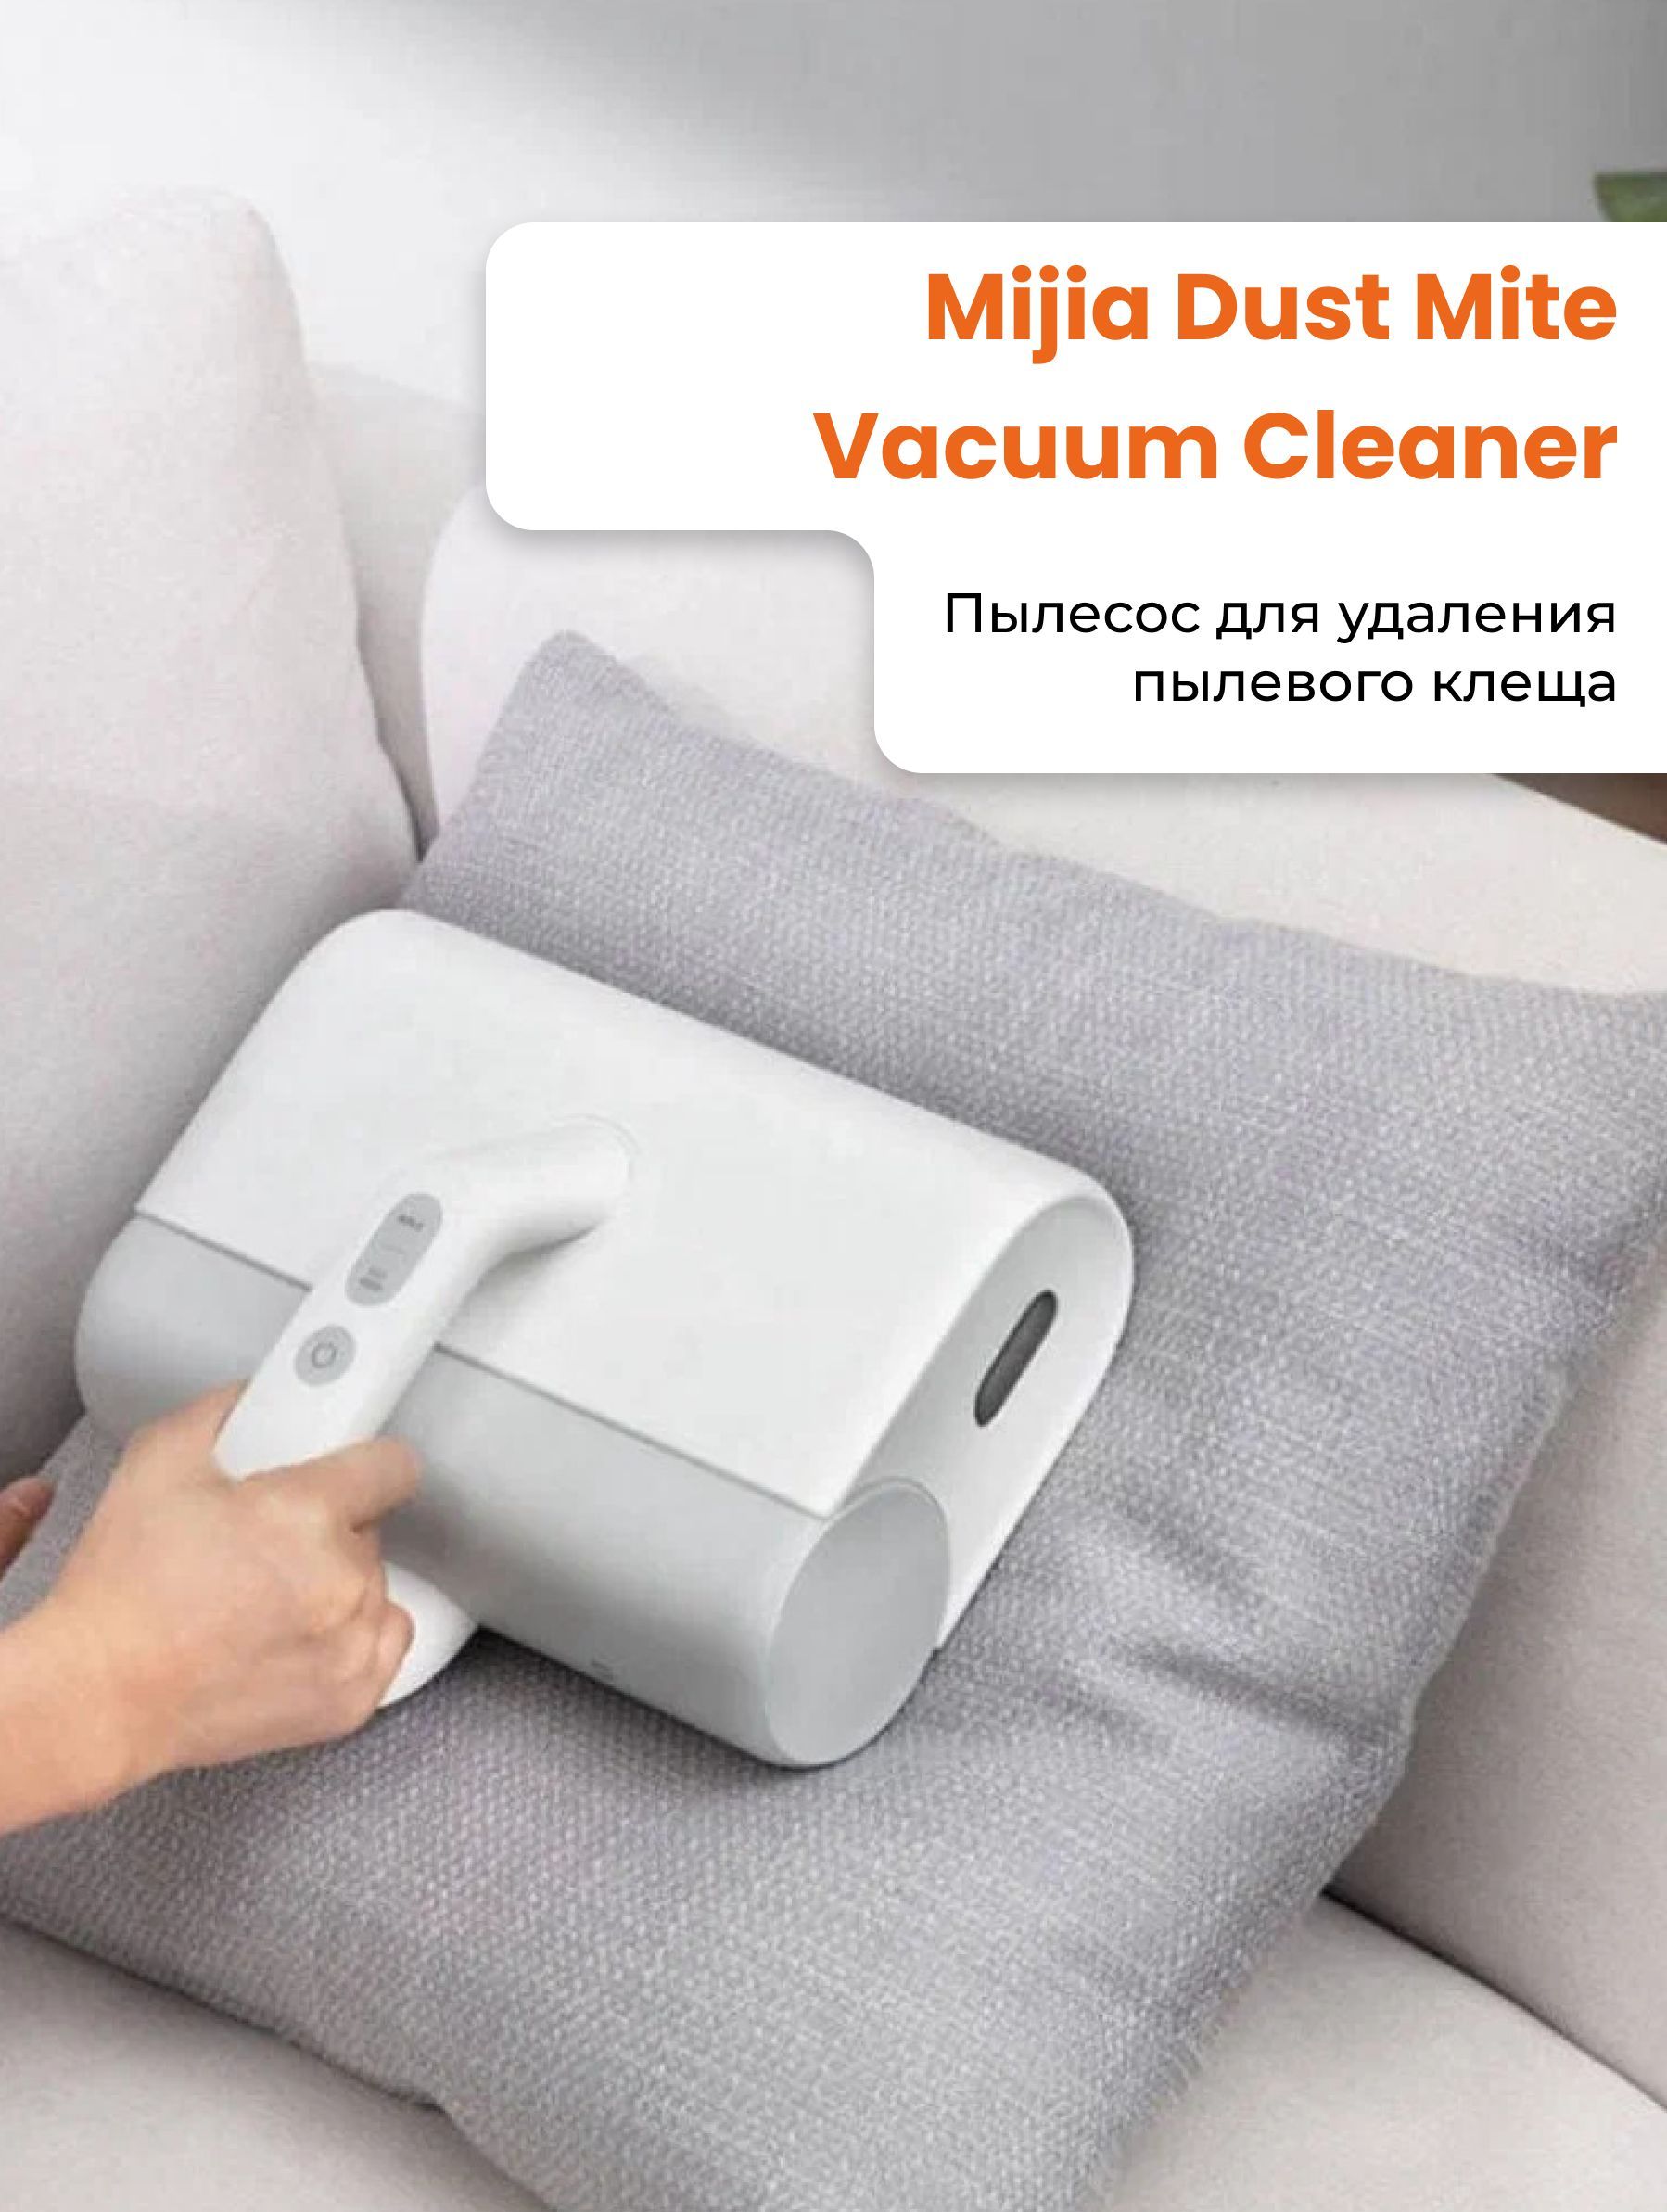 Mijia dust mite vacuum cleaner. Xiaomi mjcmy01dy. Пылесос Xiaomi (mjcmy01dy). Xiaomi Dust Mite Vacuum. Xiaomi Mijia Dust Mite Vacuum Cleaner.